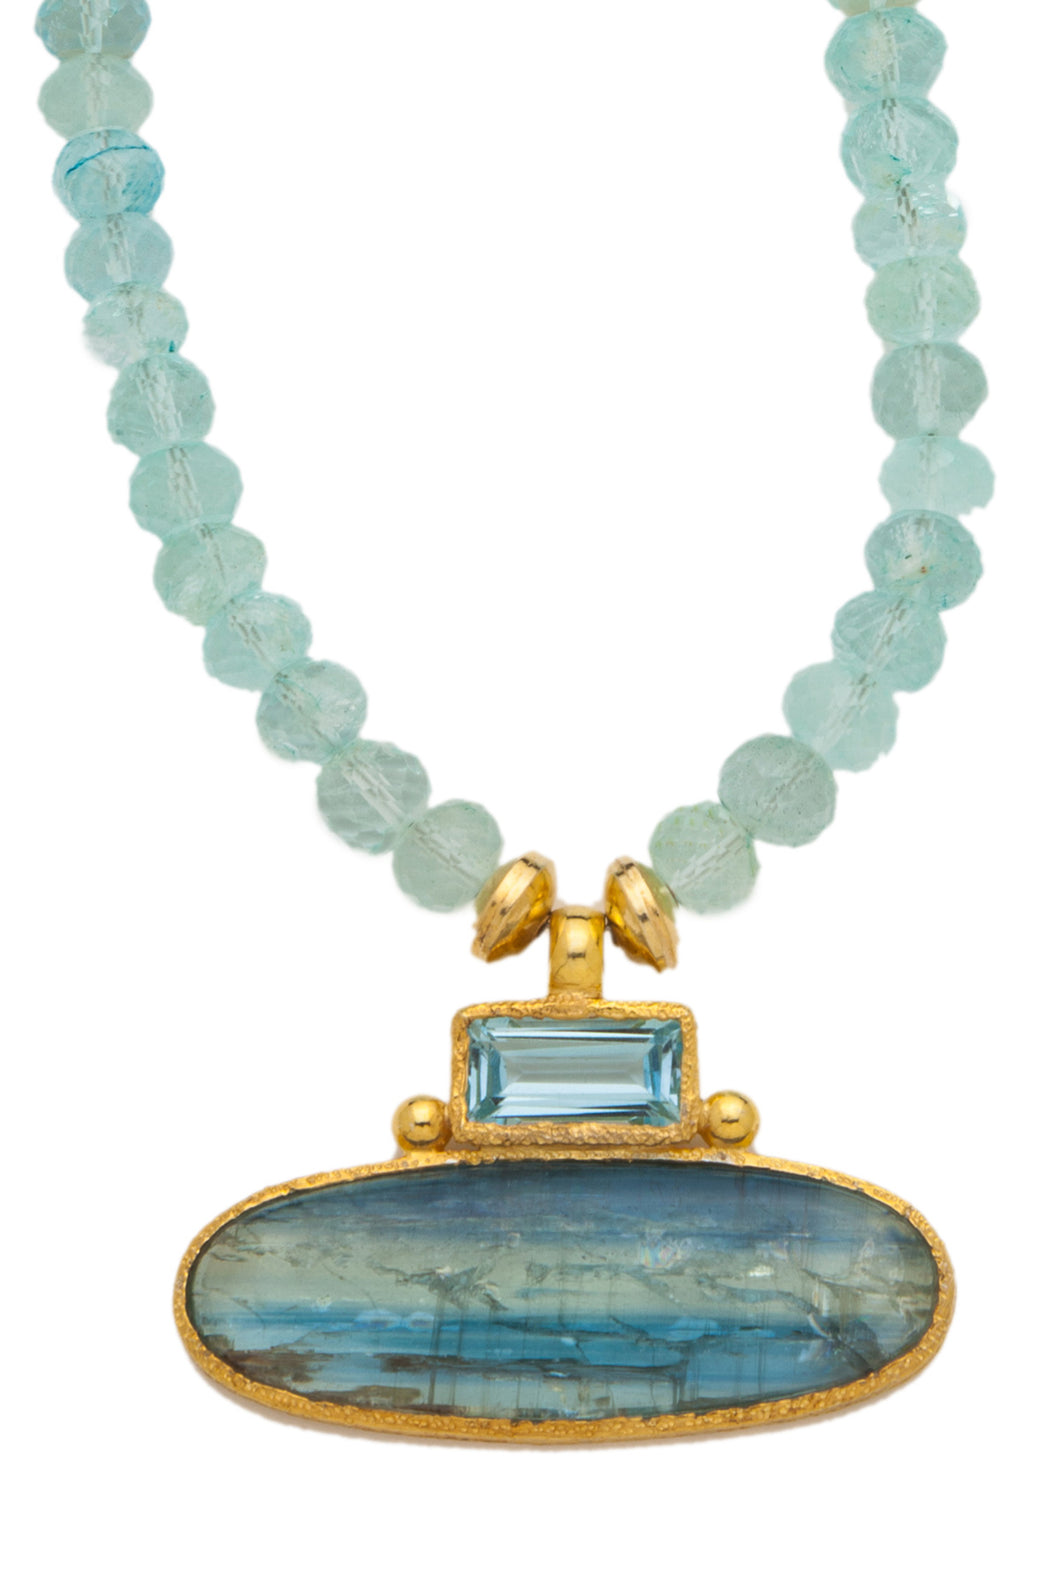 ONE OF A KIND Aqua Marine Necklace with Blue Topaz and Kyanite Pendant set in 24kt gold vermeil NF277-AM-BT